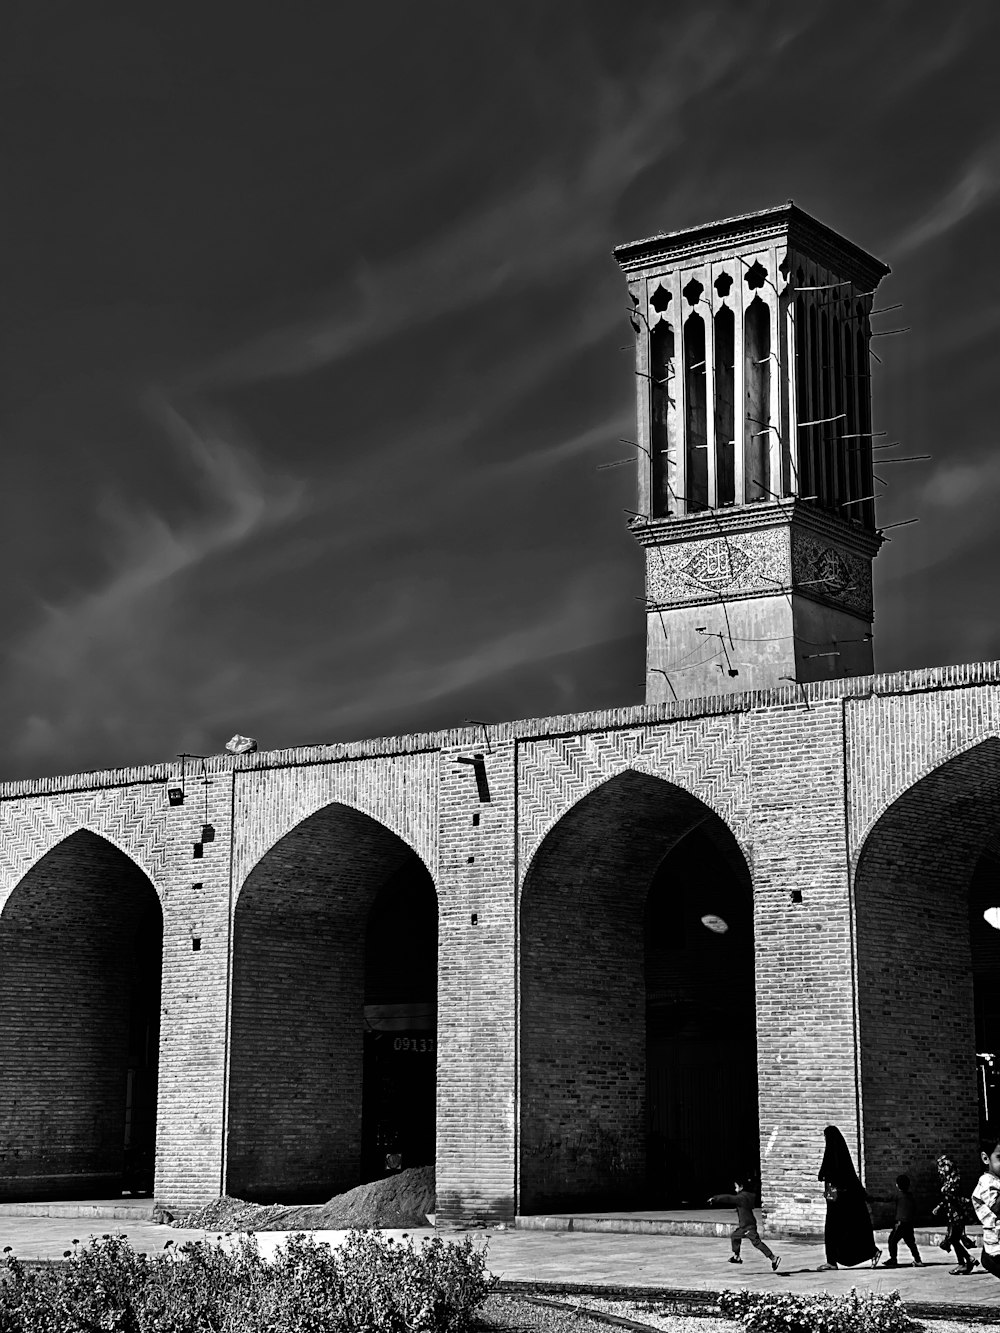 a black and white photo of a building with arches and a clock tower